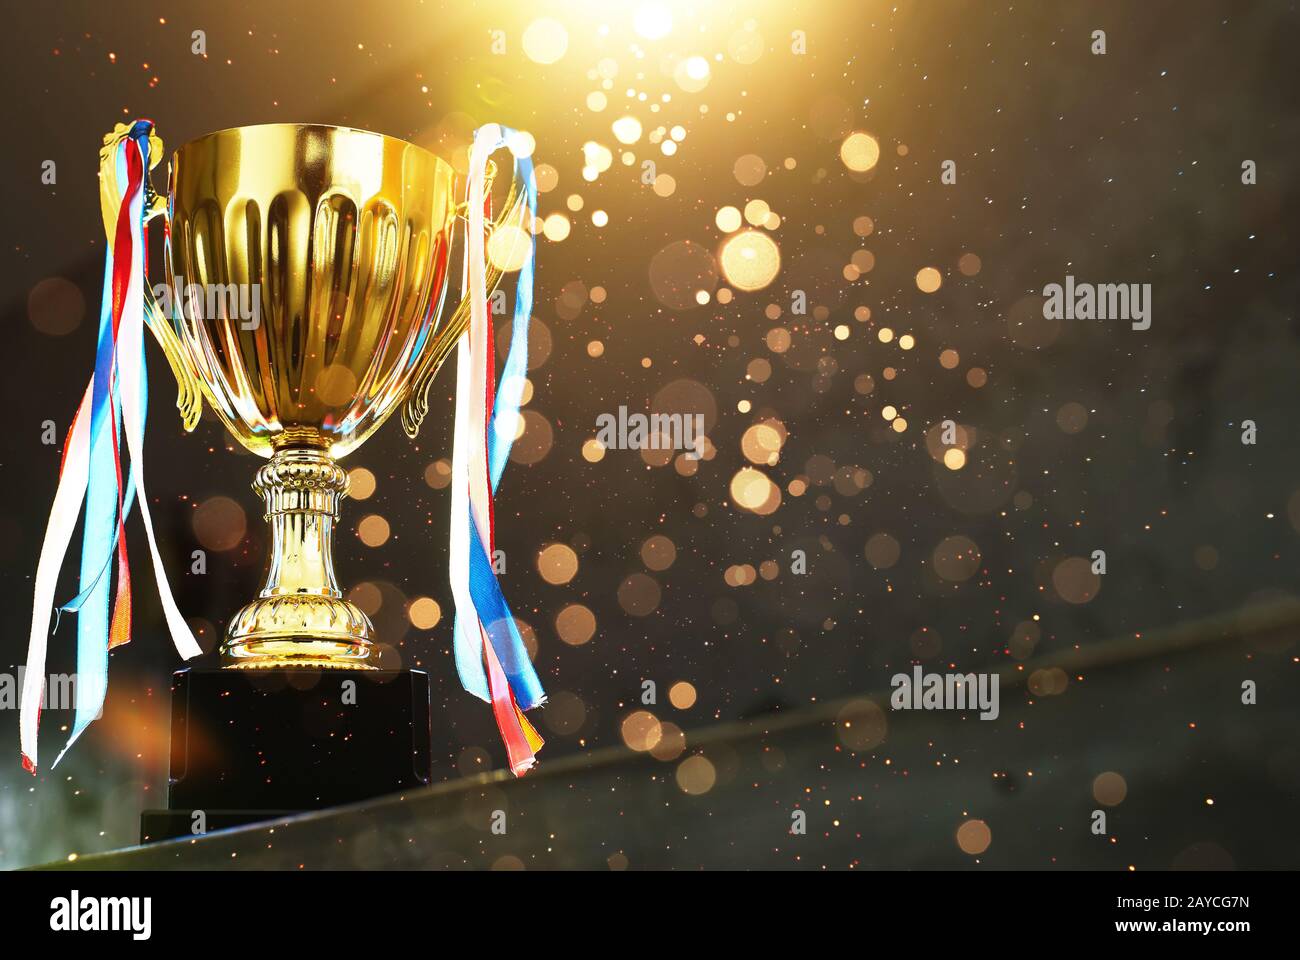 Low key golden trophy on the blur gray background with abstract shiny lights . Stock Photo